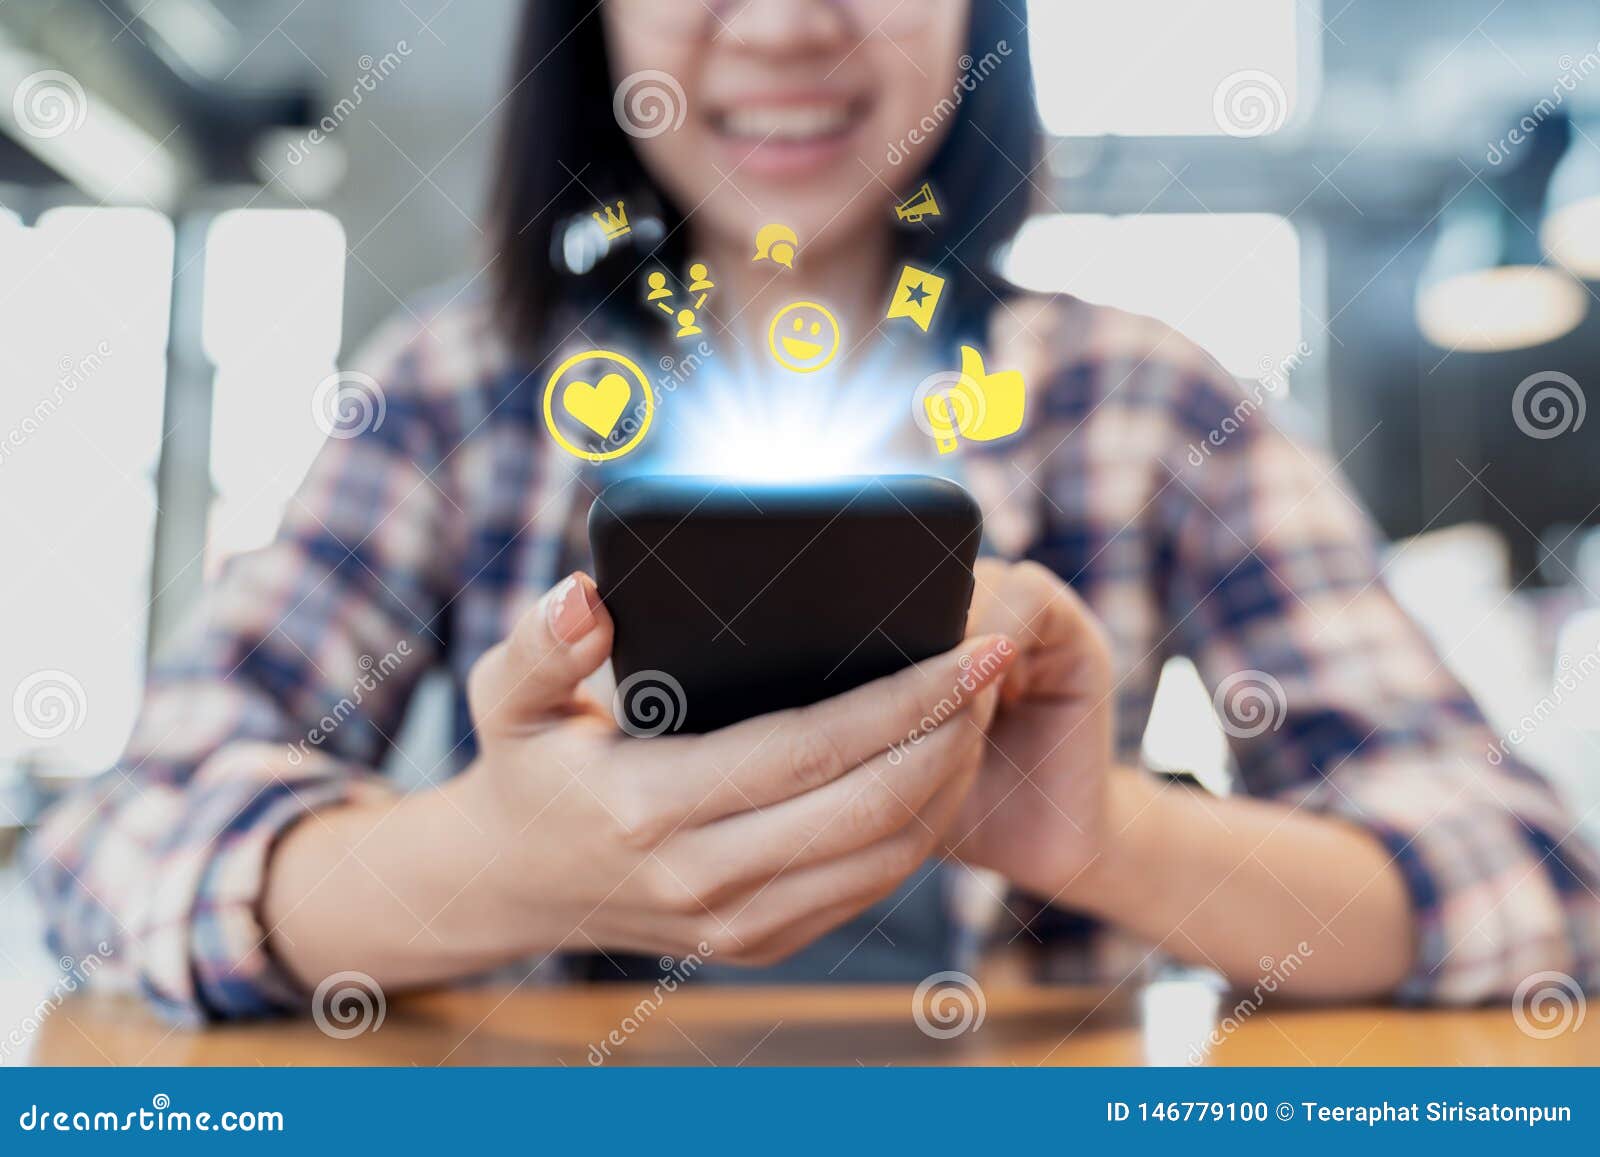 close up smartphone social media network sharing and commenting in online community. influencer woman`s hand holding mobile phone